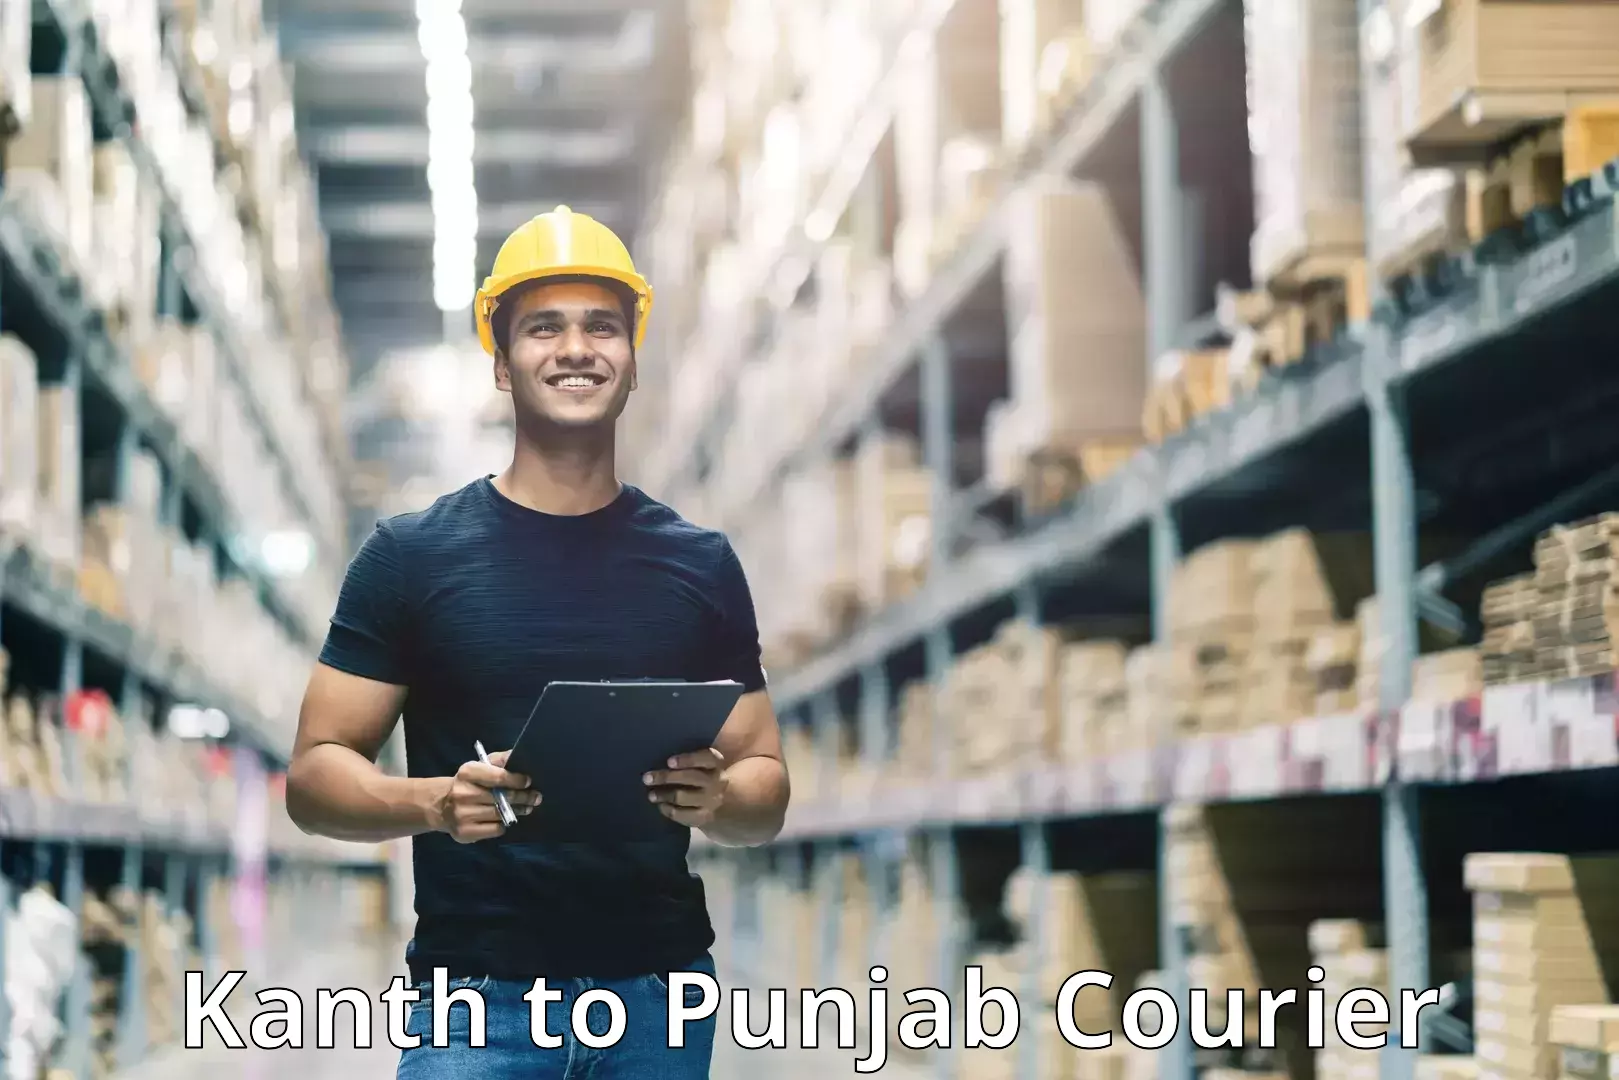 Air courier services Kanth to Punjab